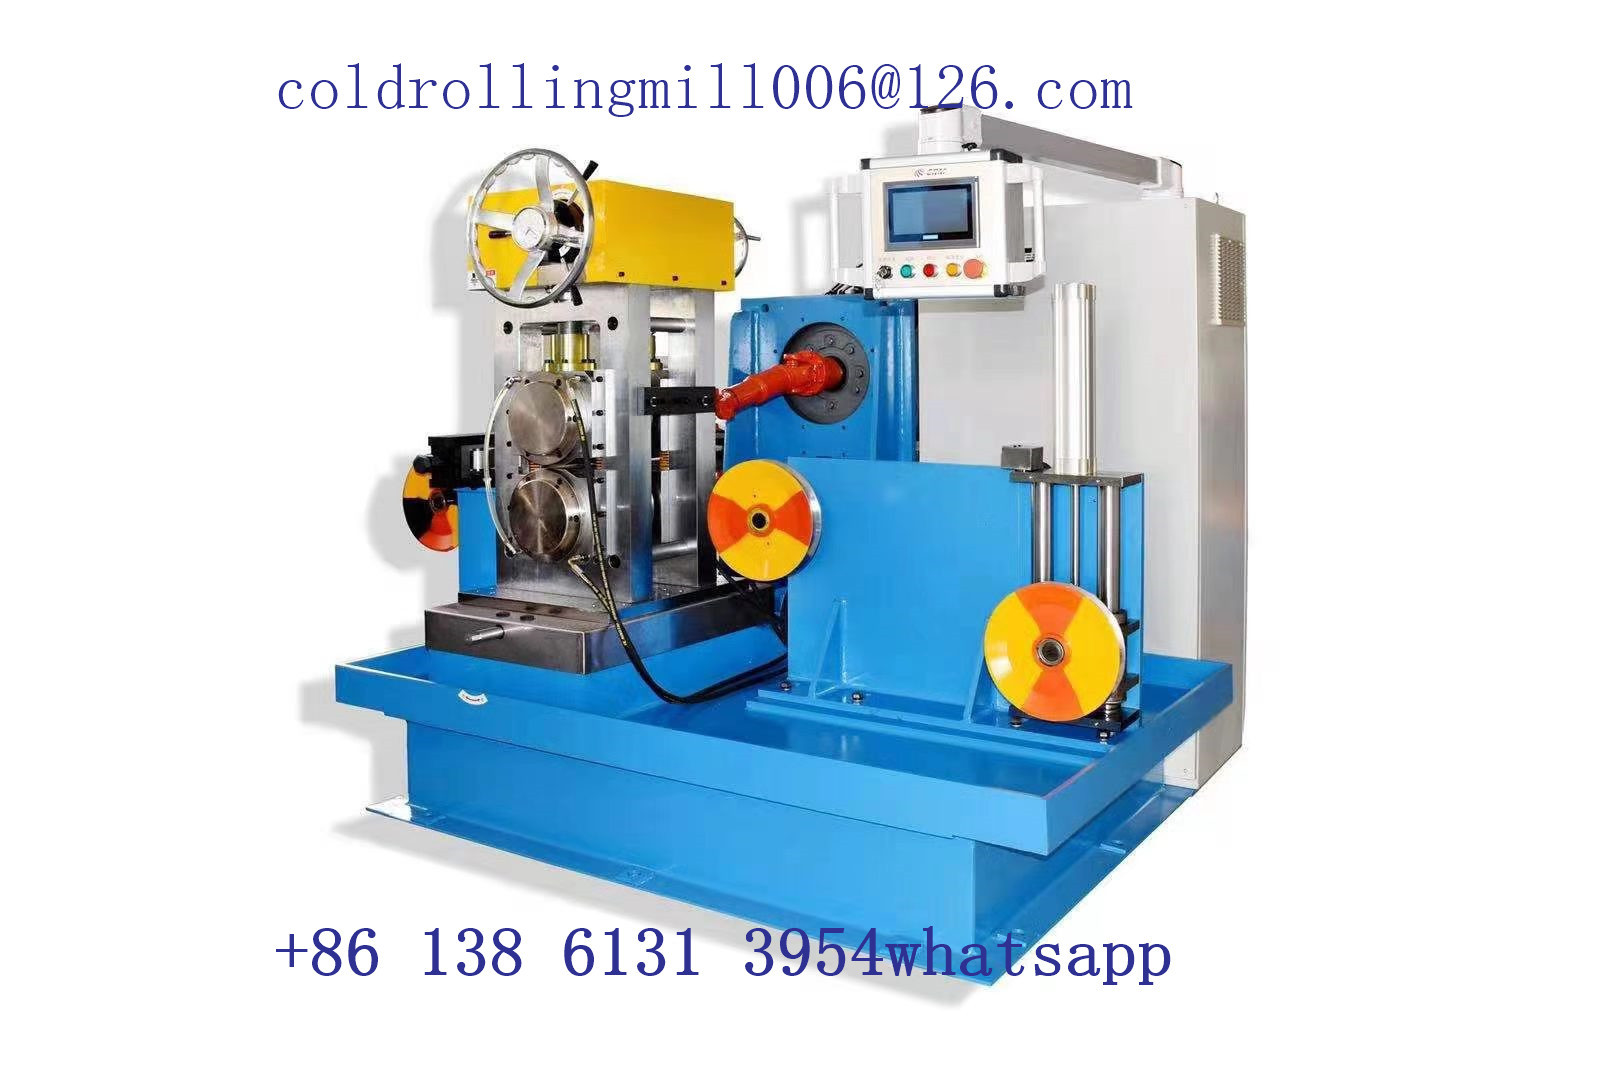 Gz300 2 Hi Cold Rolling Mill For Flat And Shaped Wires